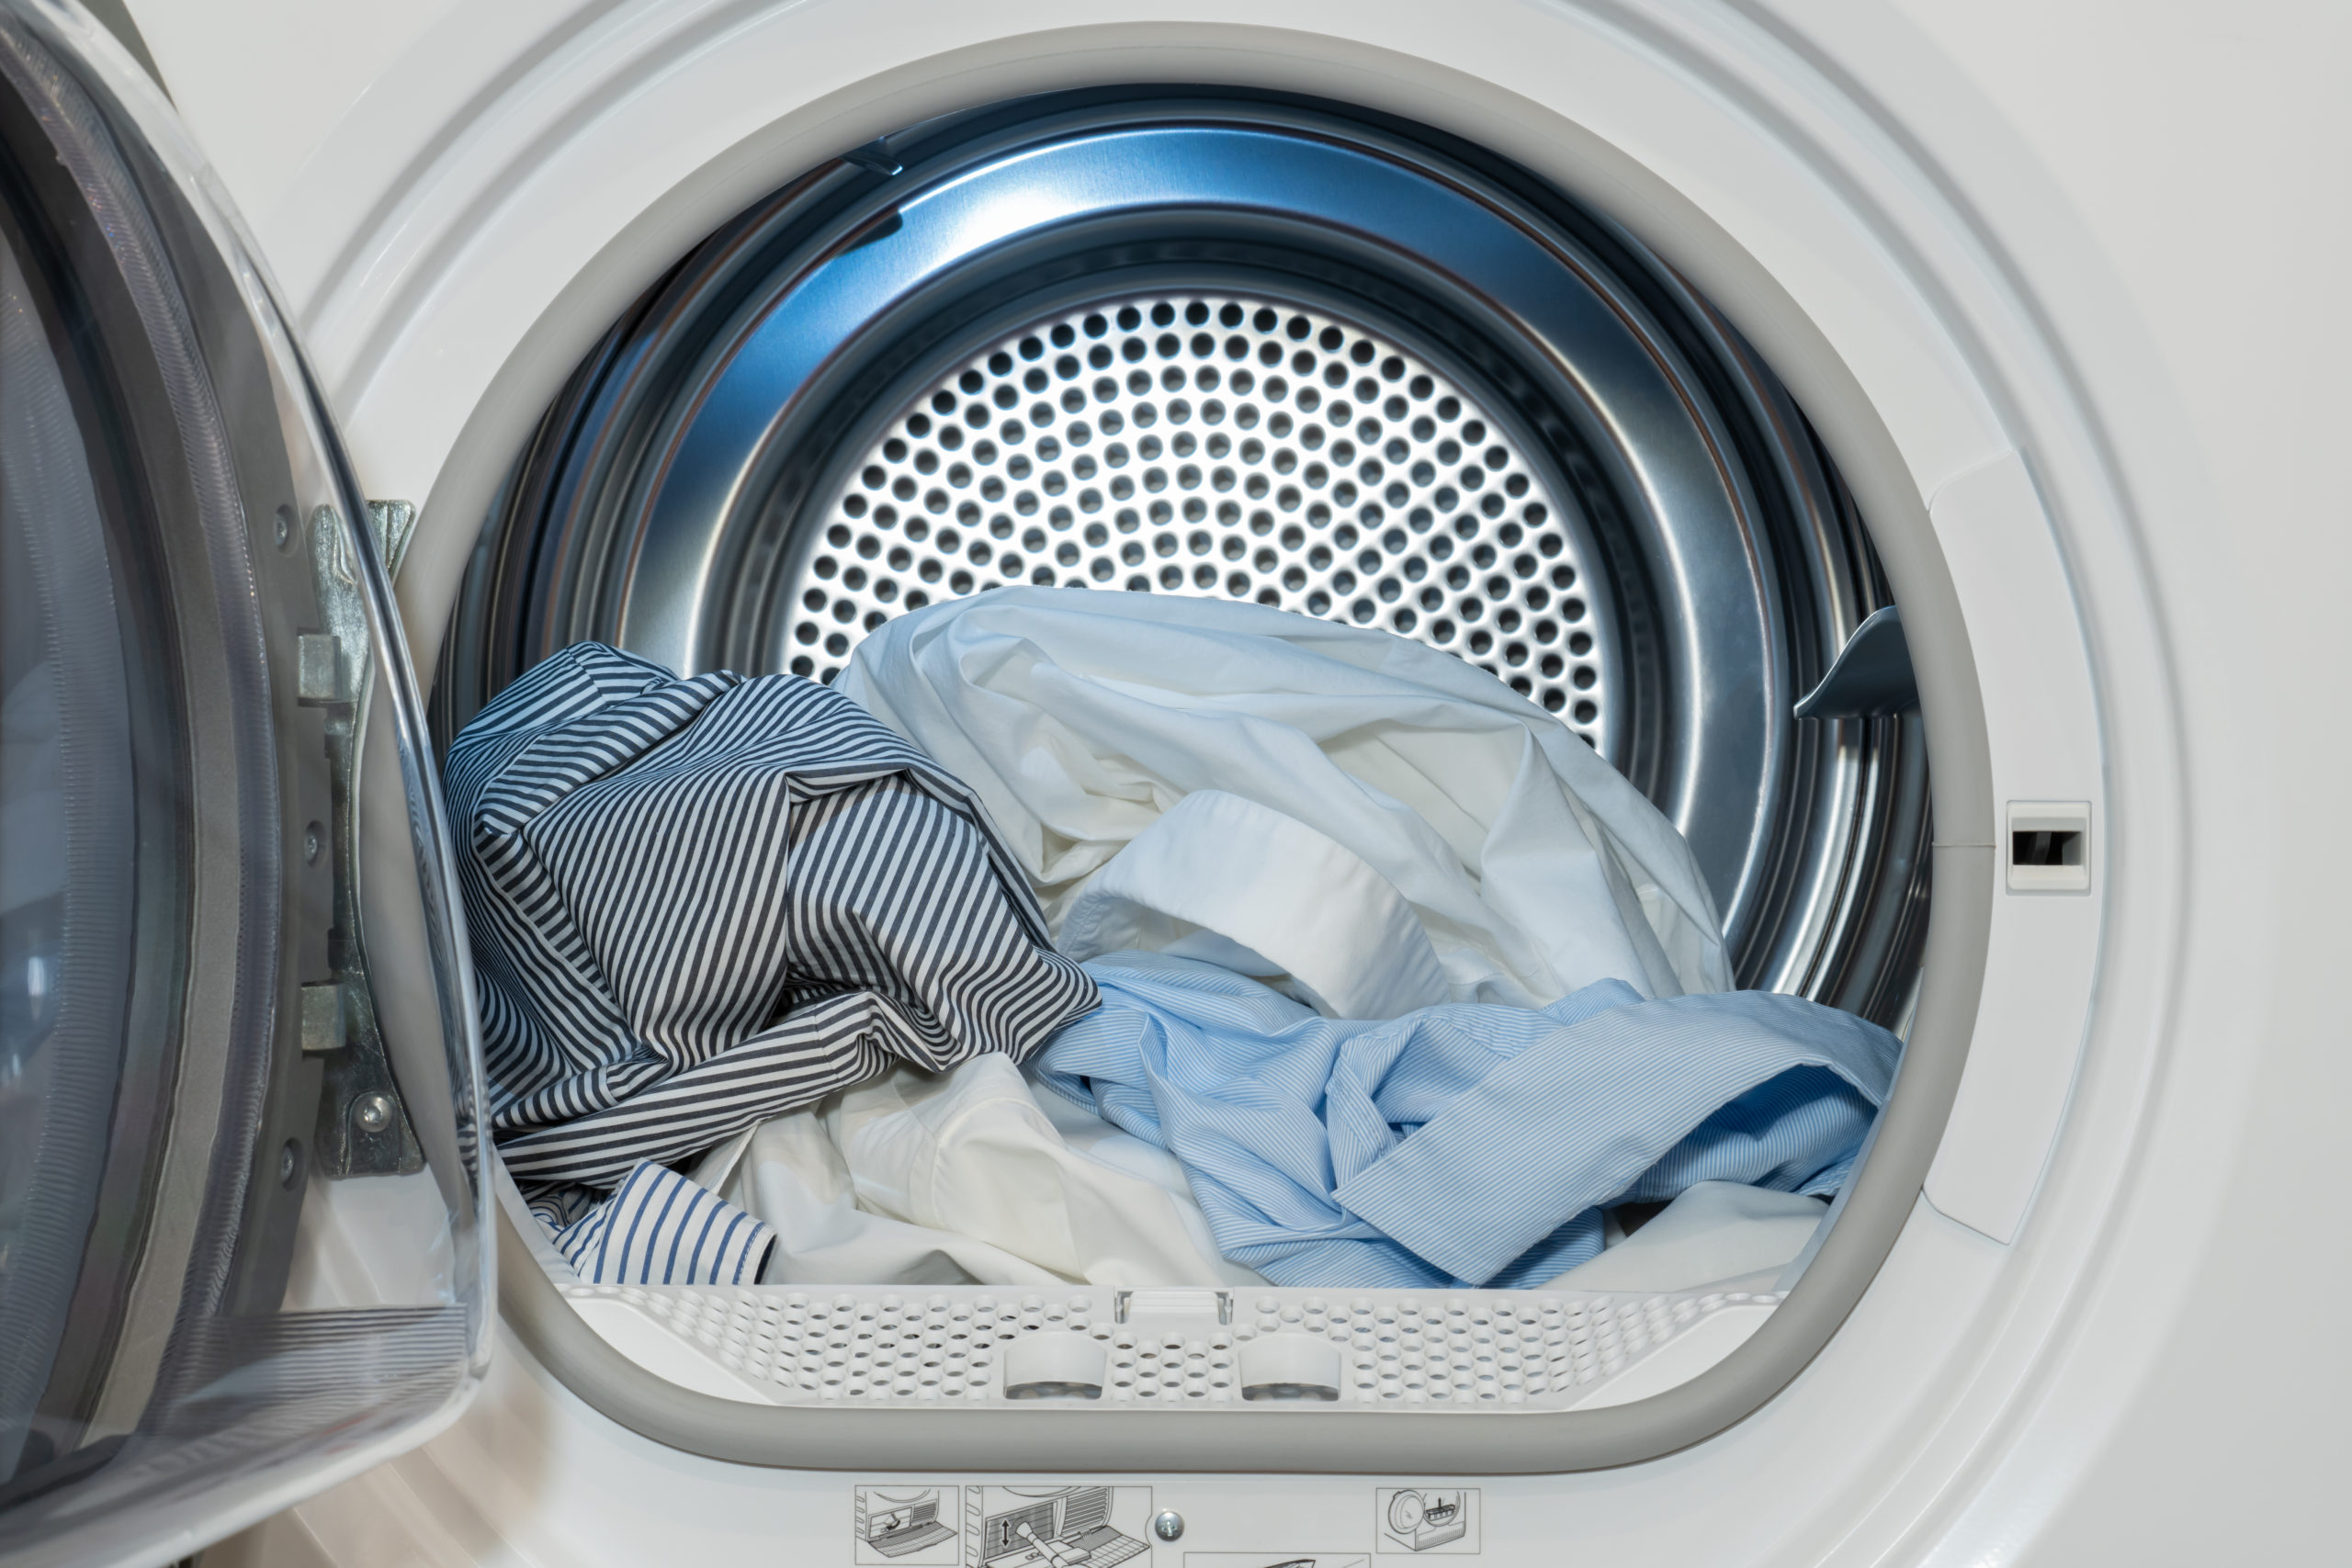 Why are fewer people doing laundry?  Blame it on the “low wash”